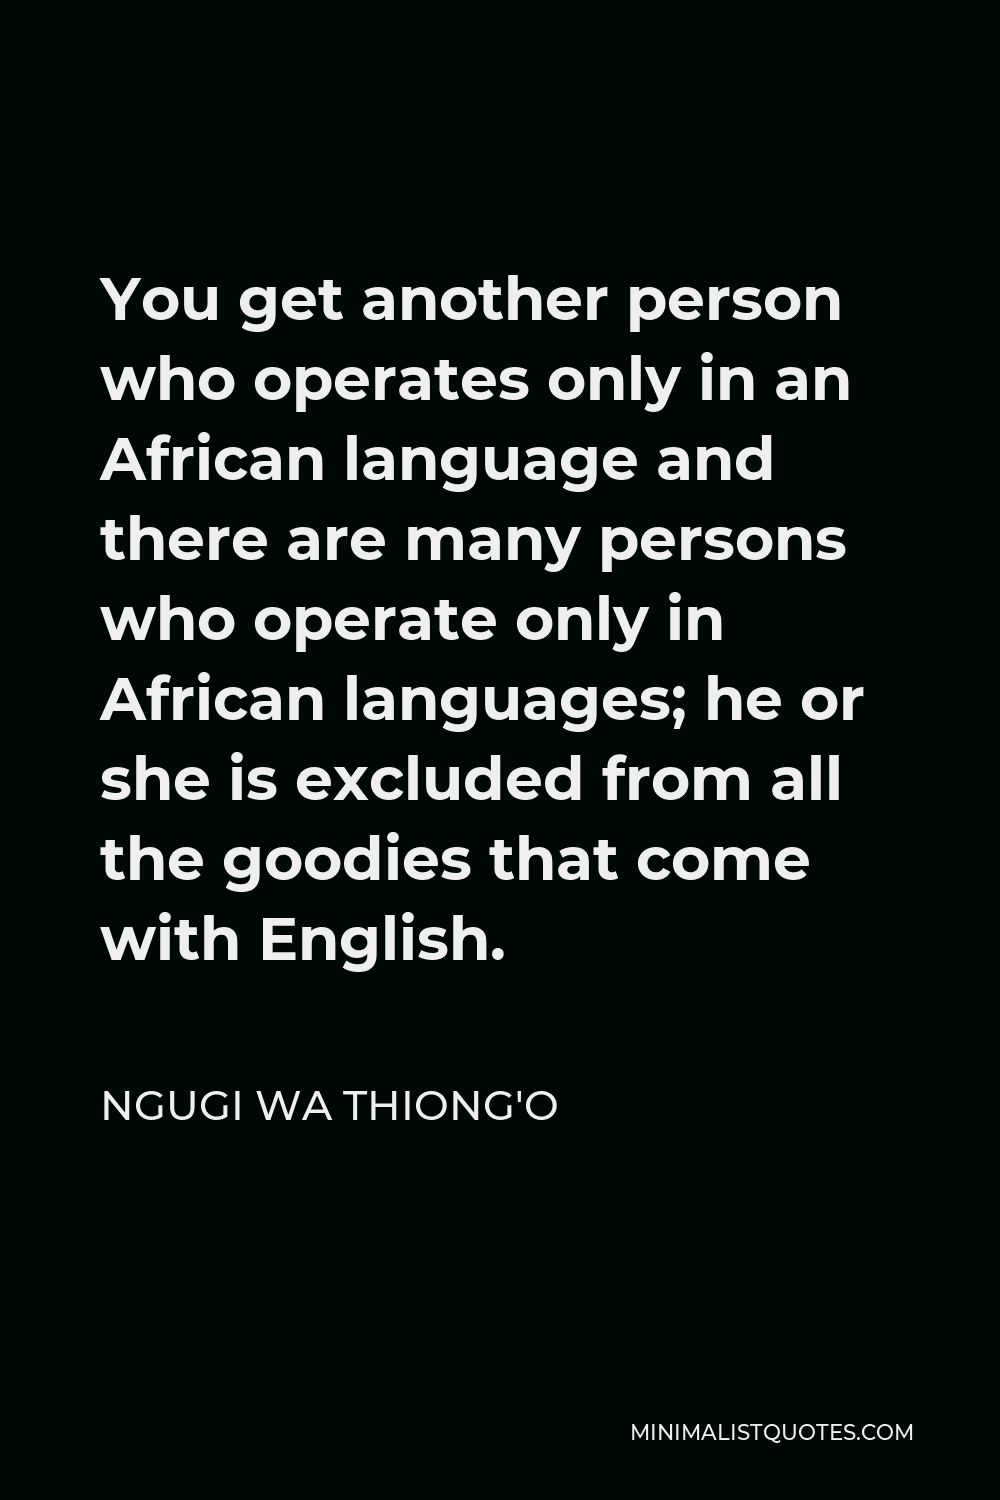 Ngugi wa Thiong'o Quote - You get another person who operates only in an African language and there are many persons who operate only in African languages; he or she is excluded from all the goodies that come with English.